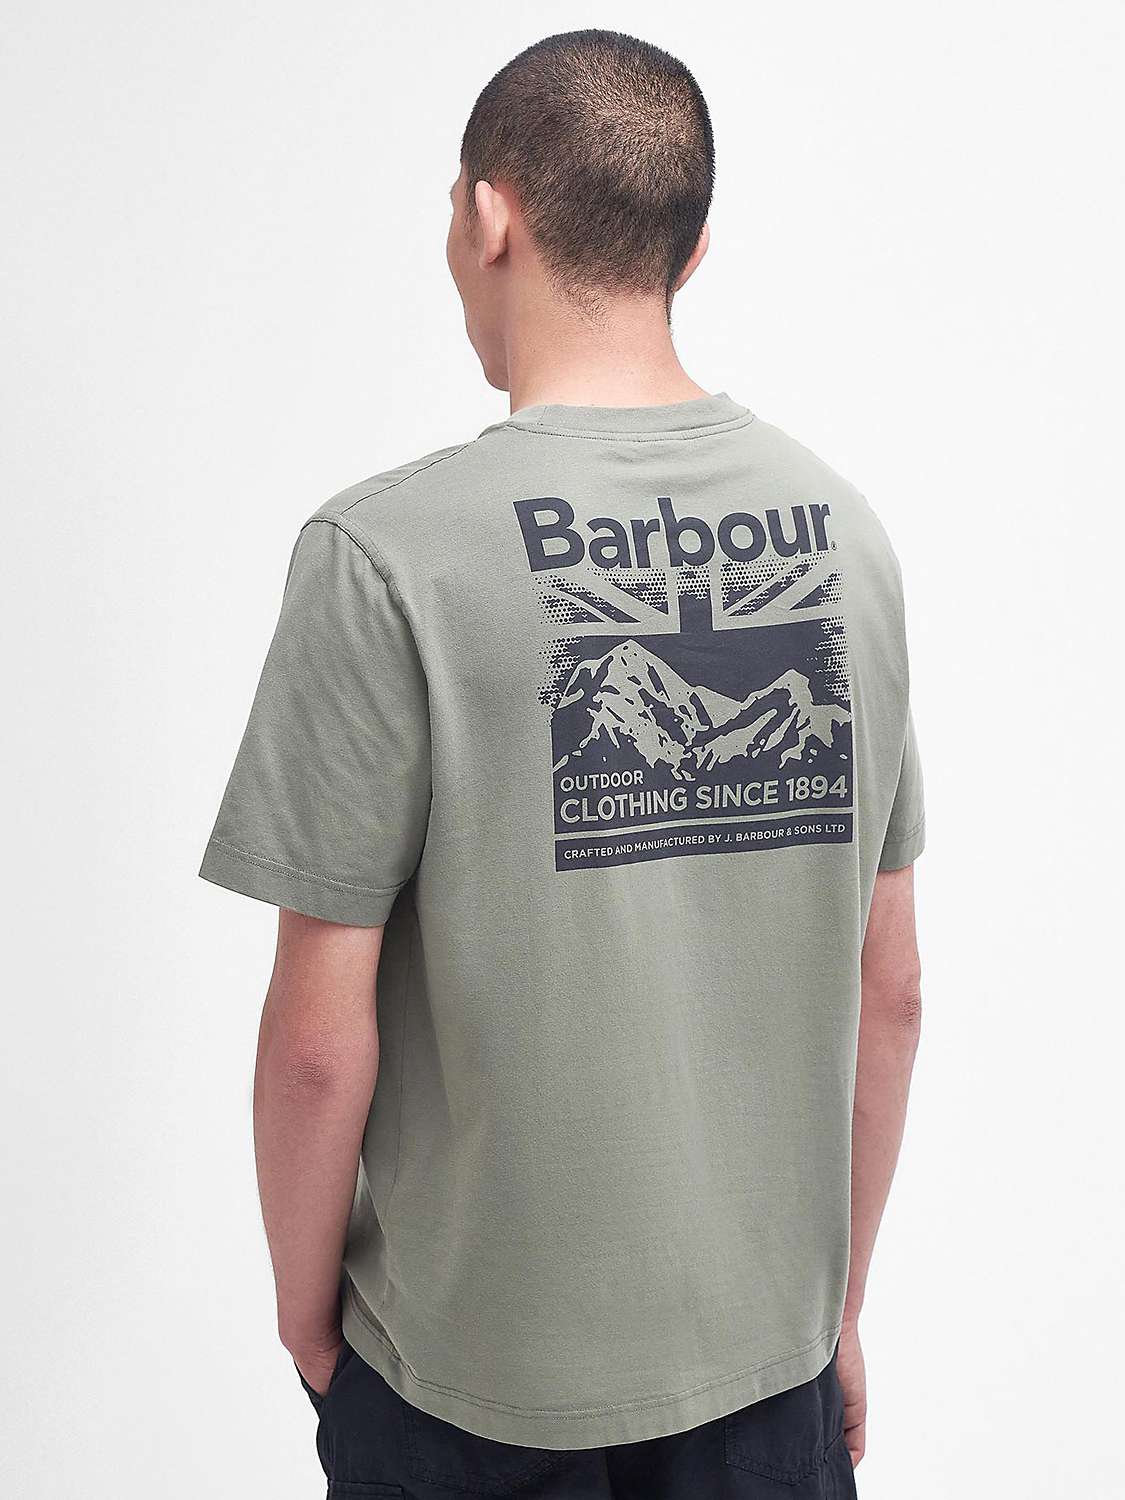 Buy Barbour Catterick T-Shirt, Dusty Olive Online at johnlewis.com